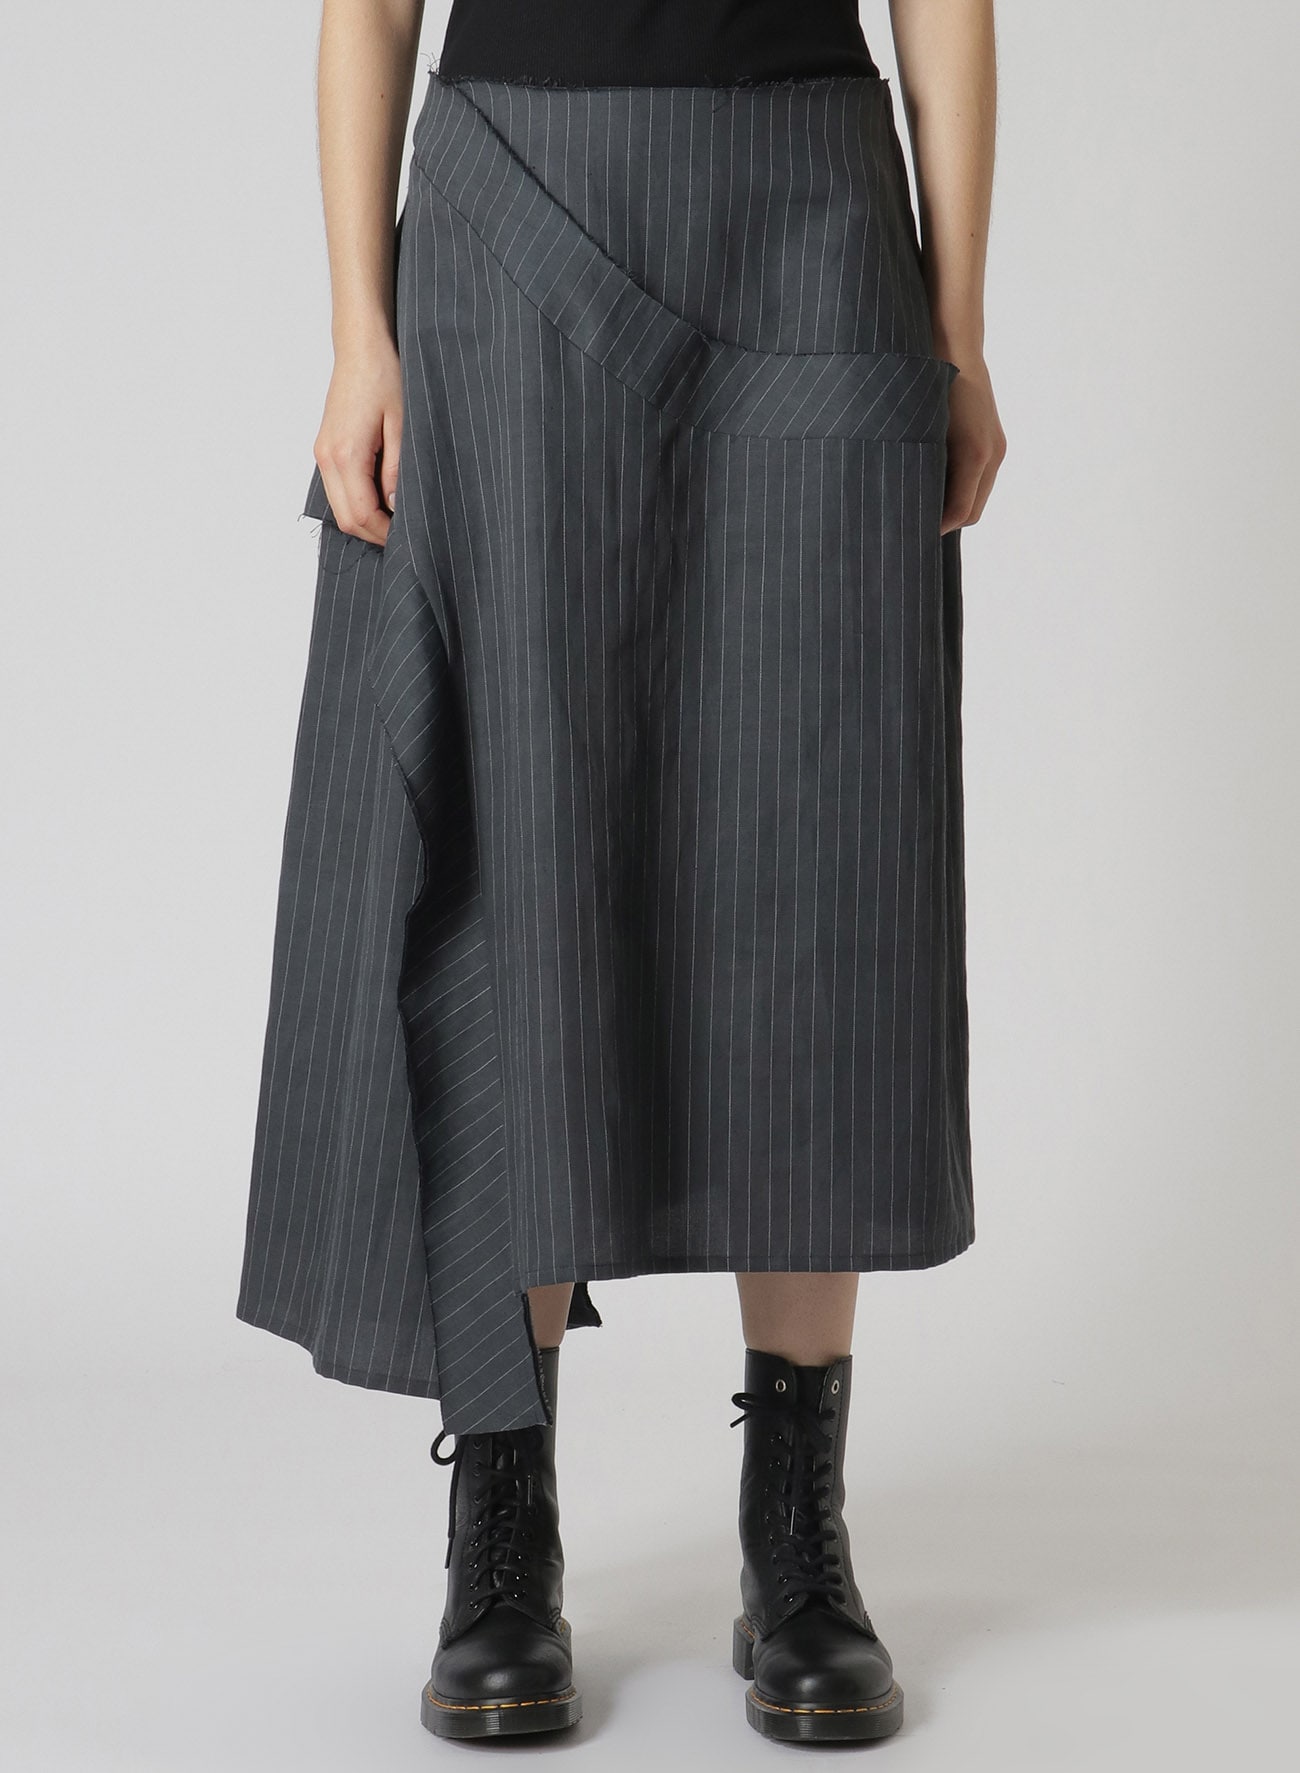 LINEN COTTON PIN-STRIPED UNEVEN DYEING PANELLED FLARE SKIRT